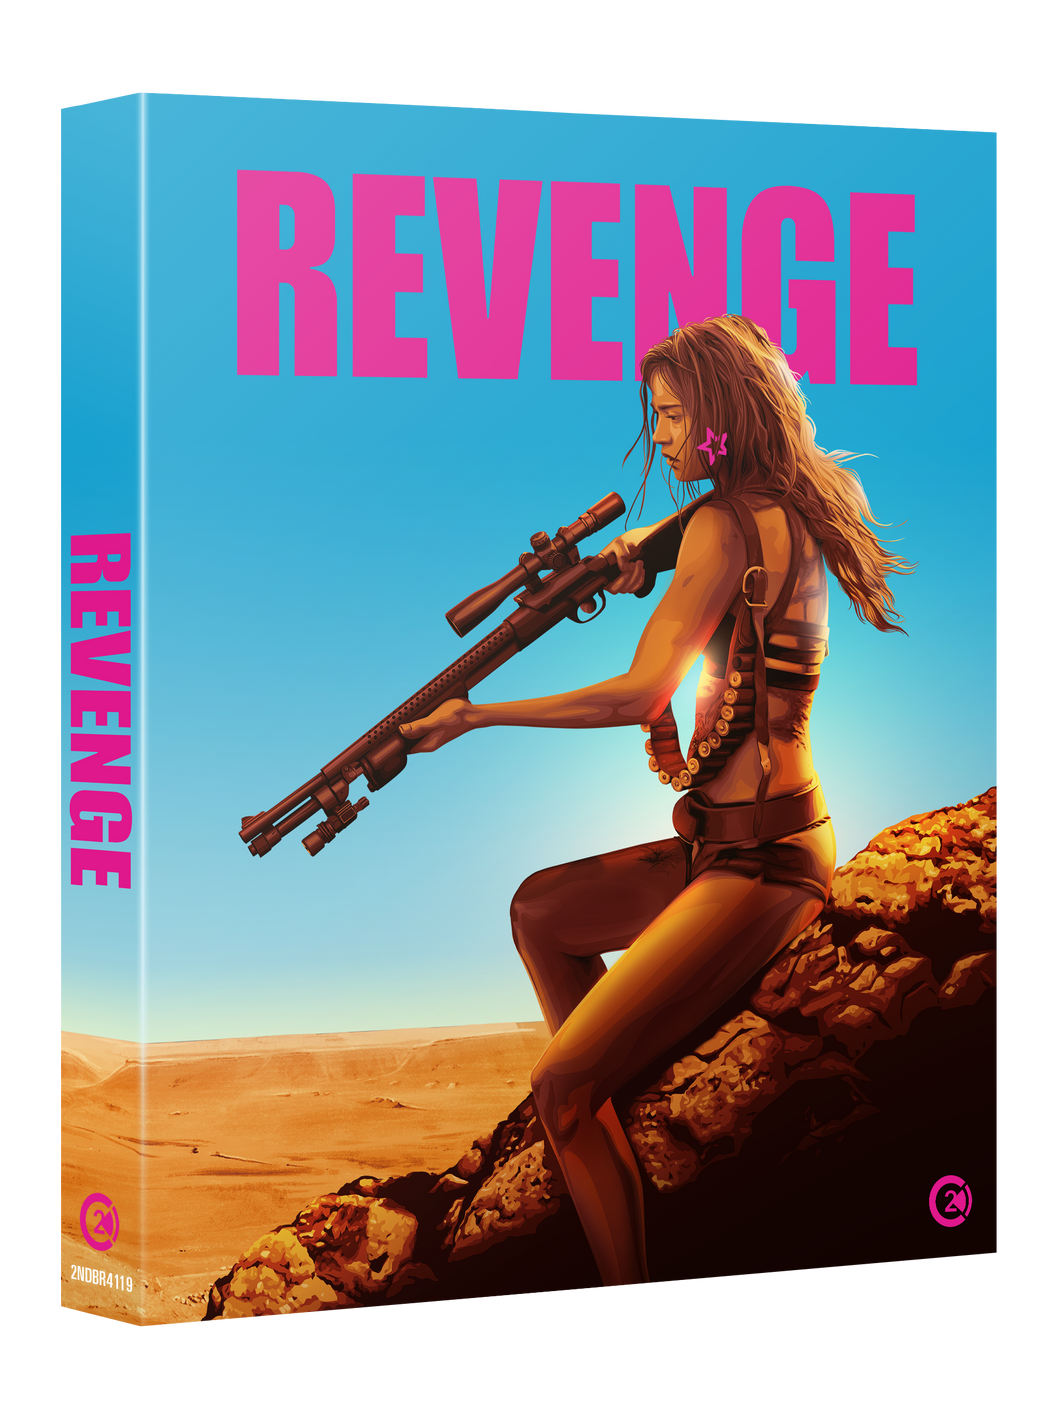 Revenge Limited Edition - OUT OF PRINT